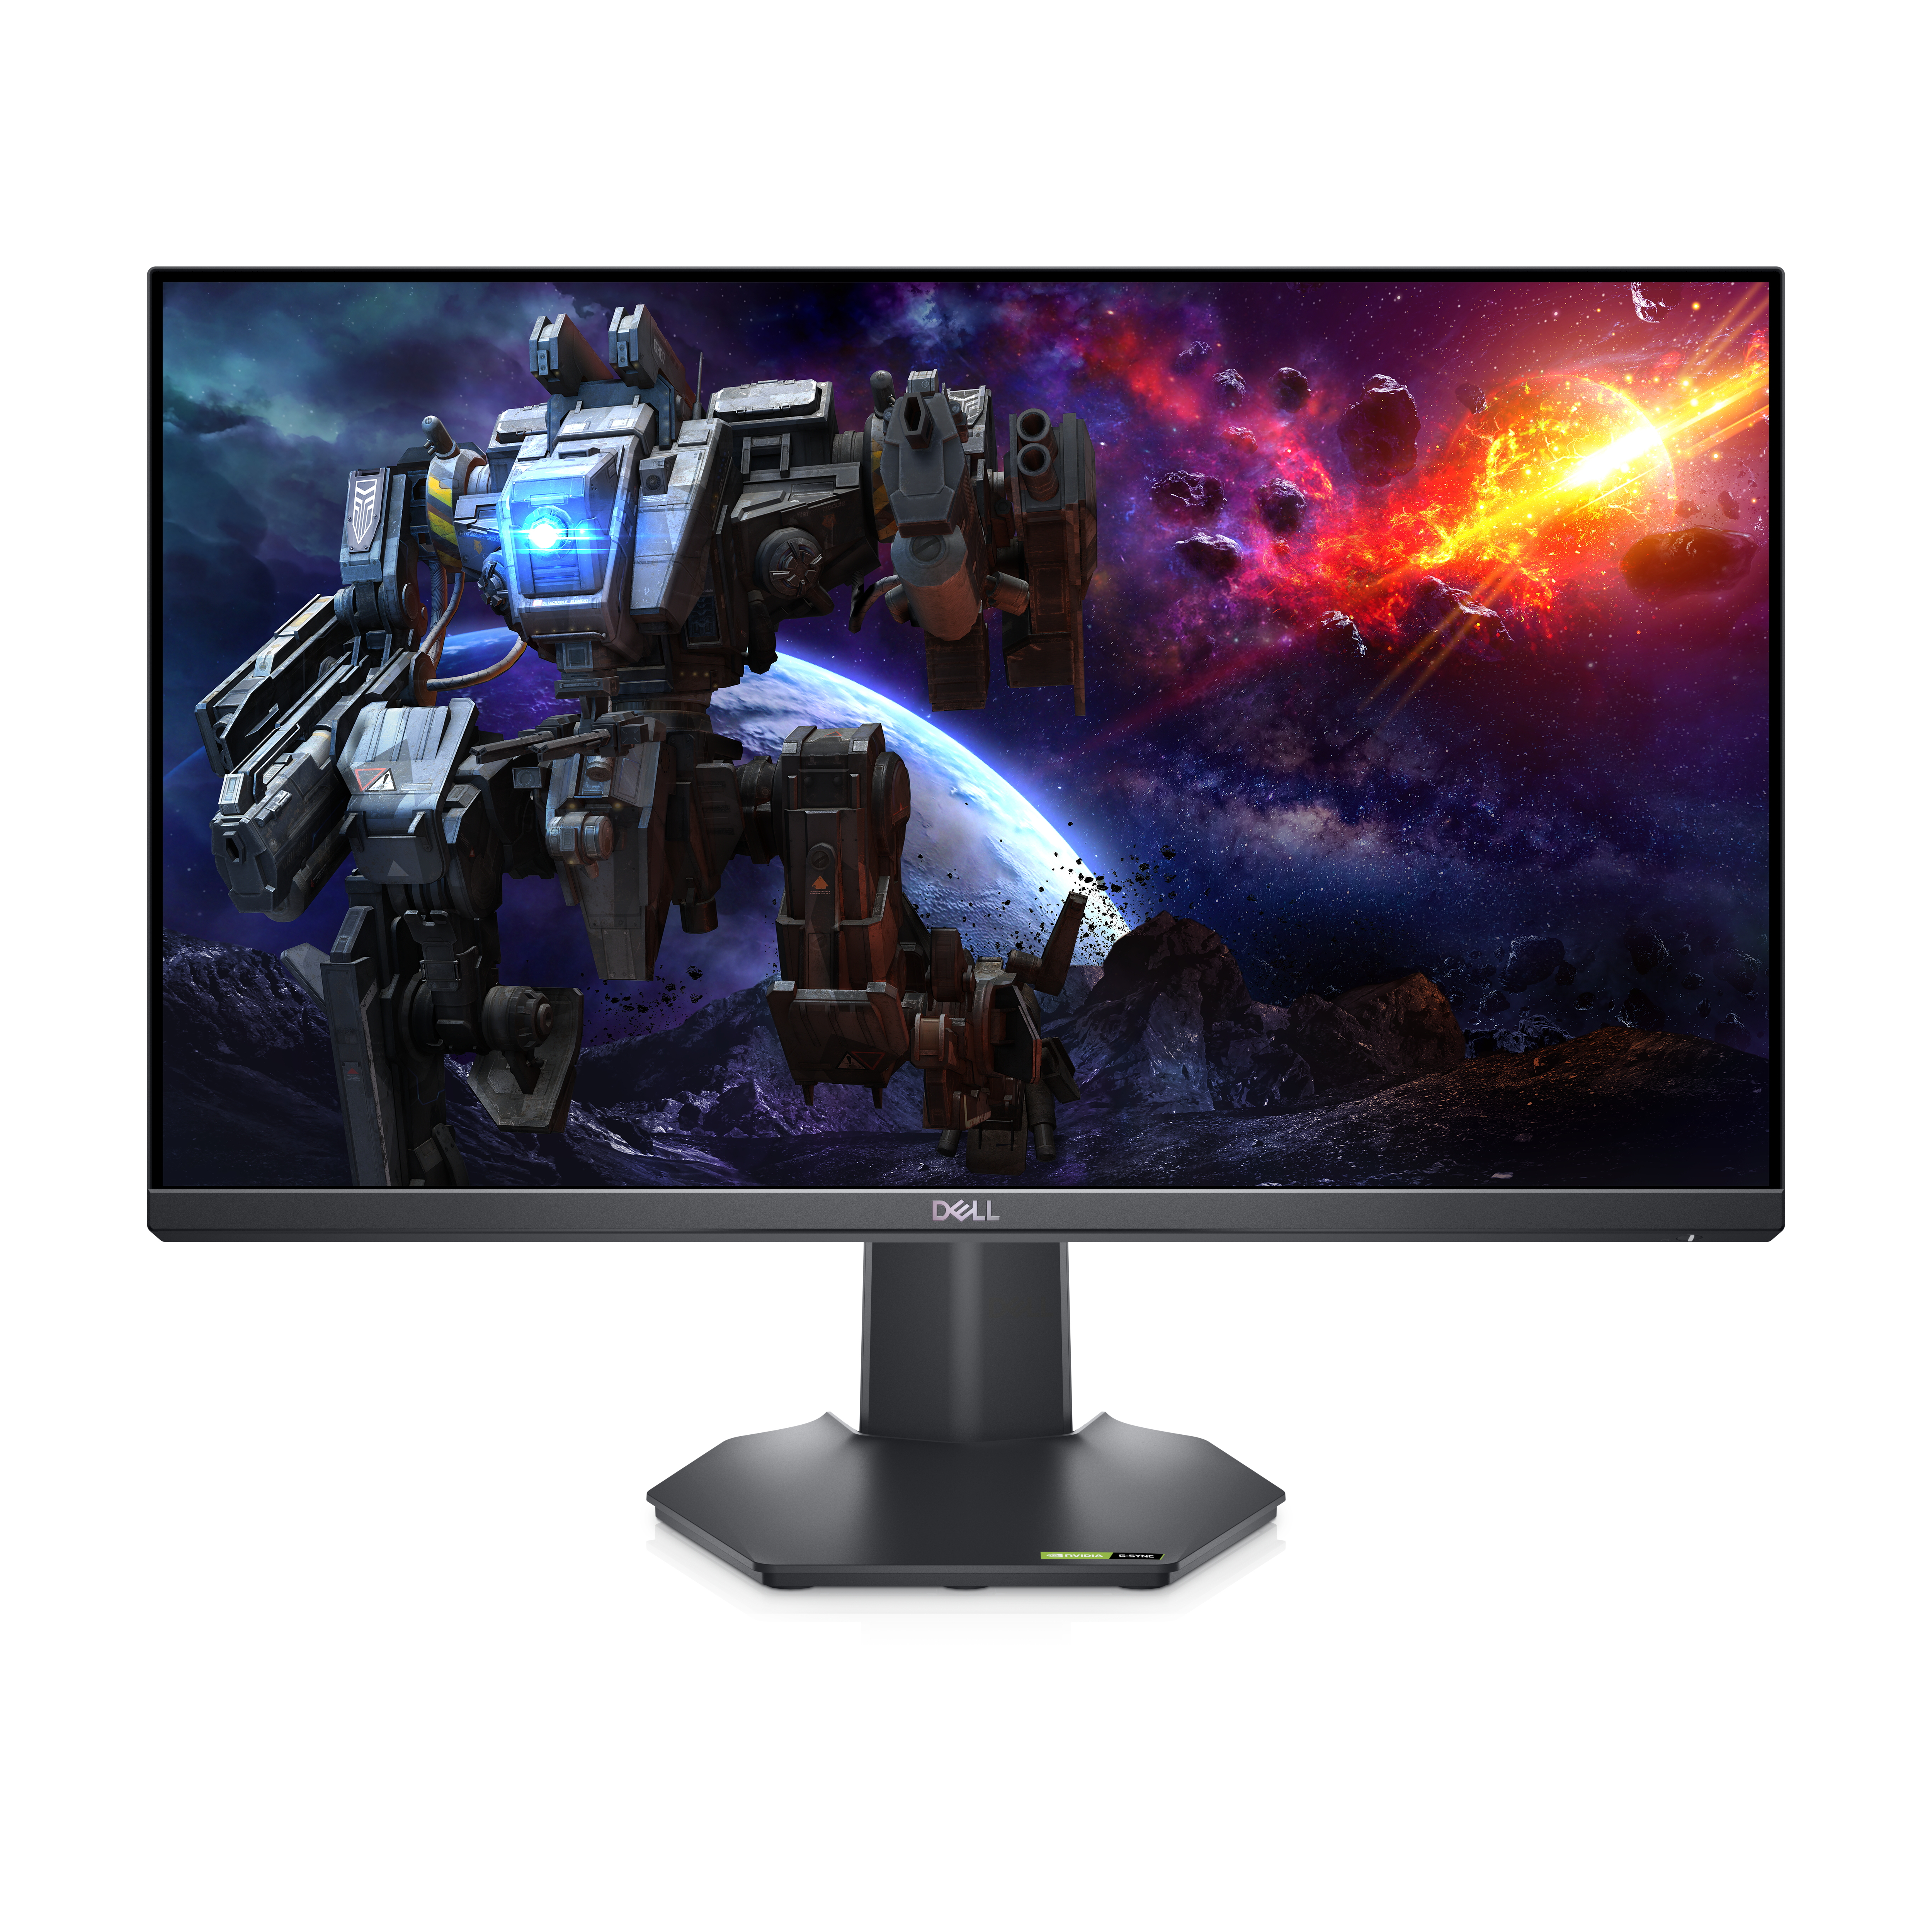 DELL G2422HS computer monitor